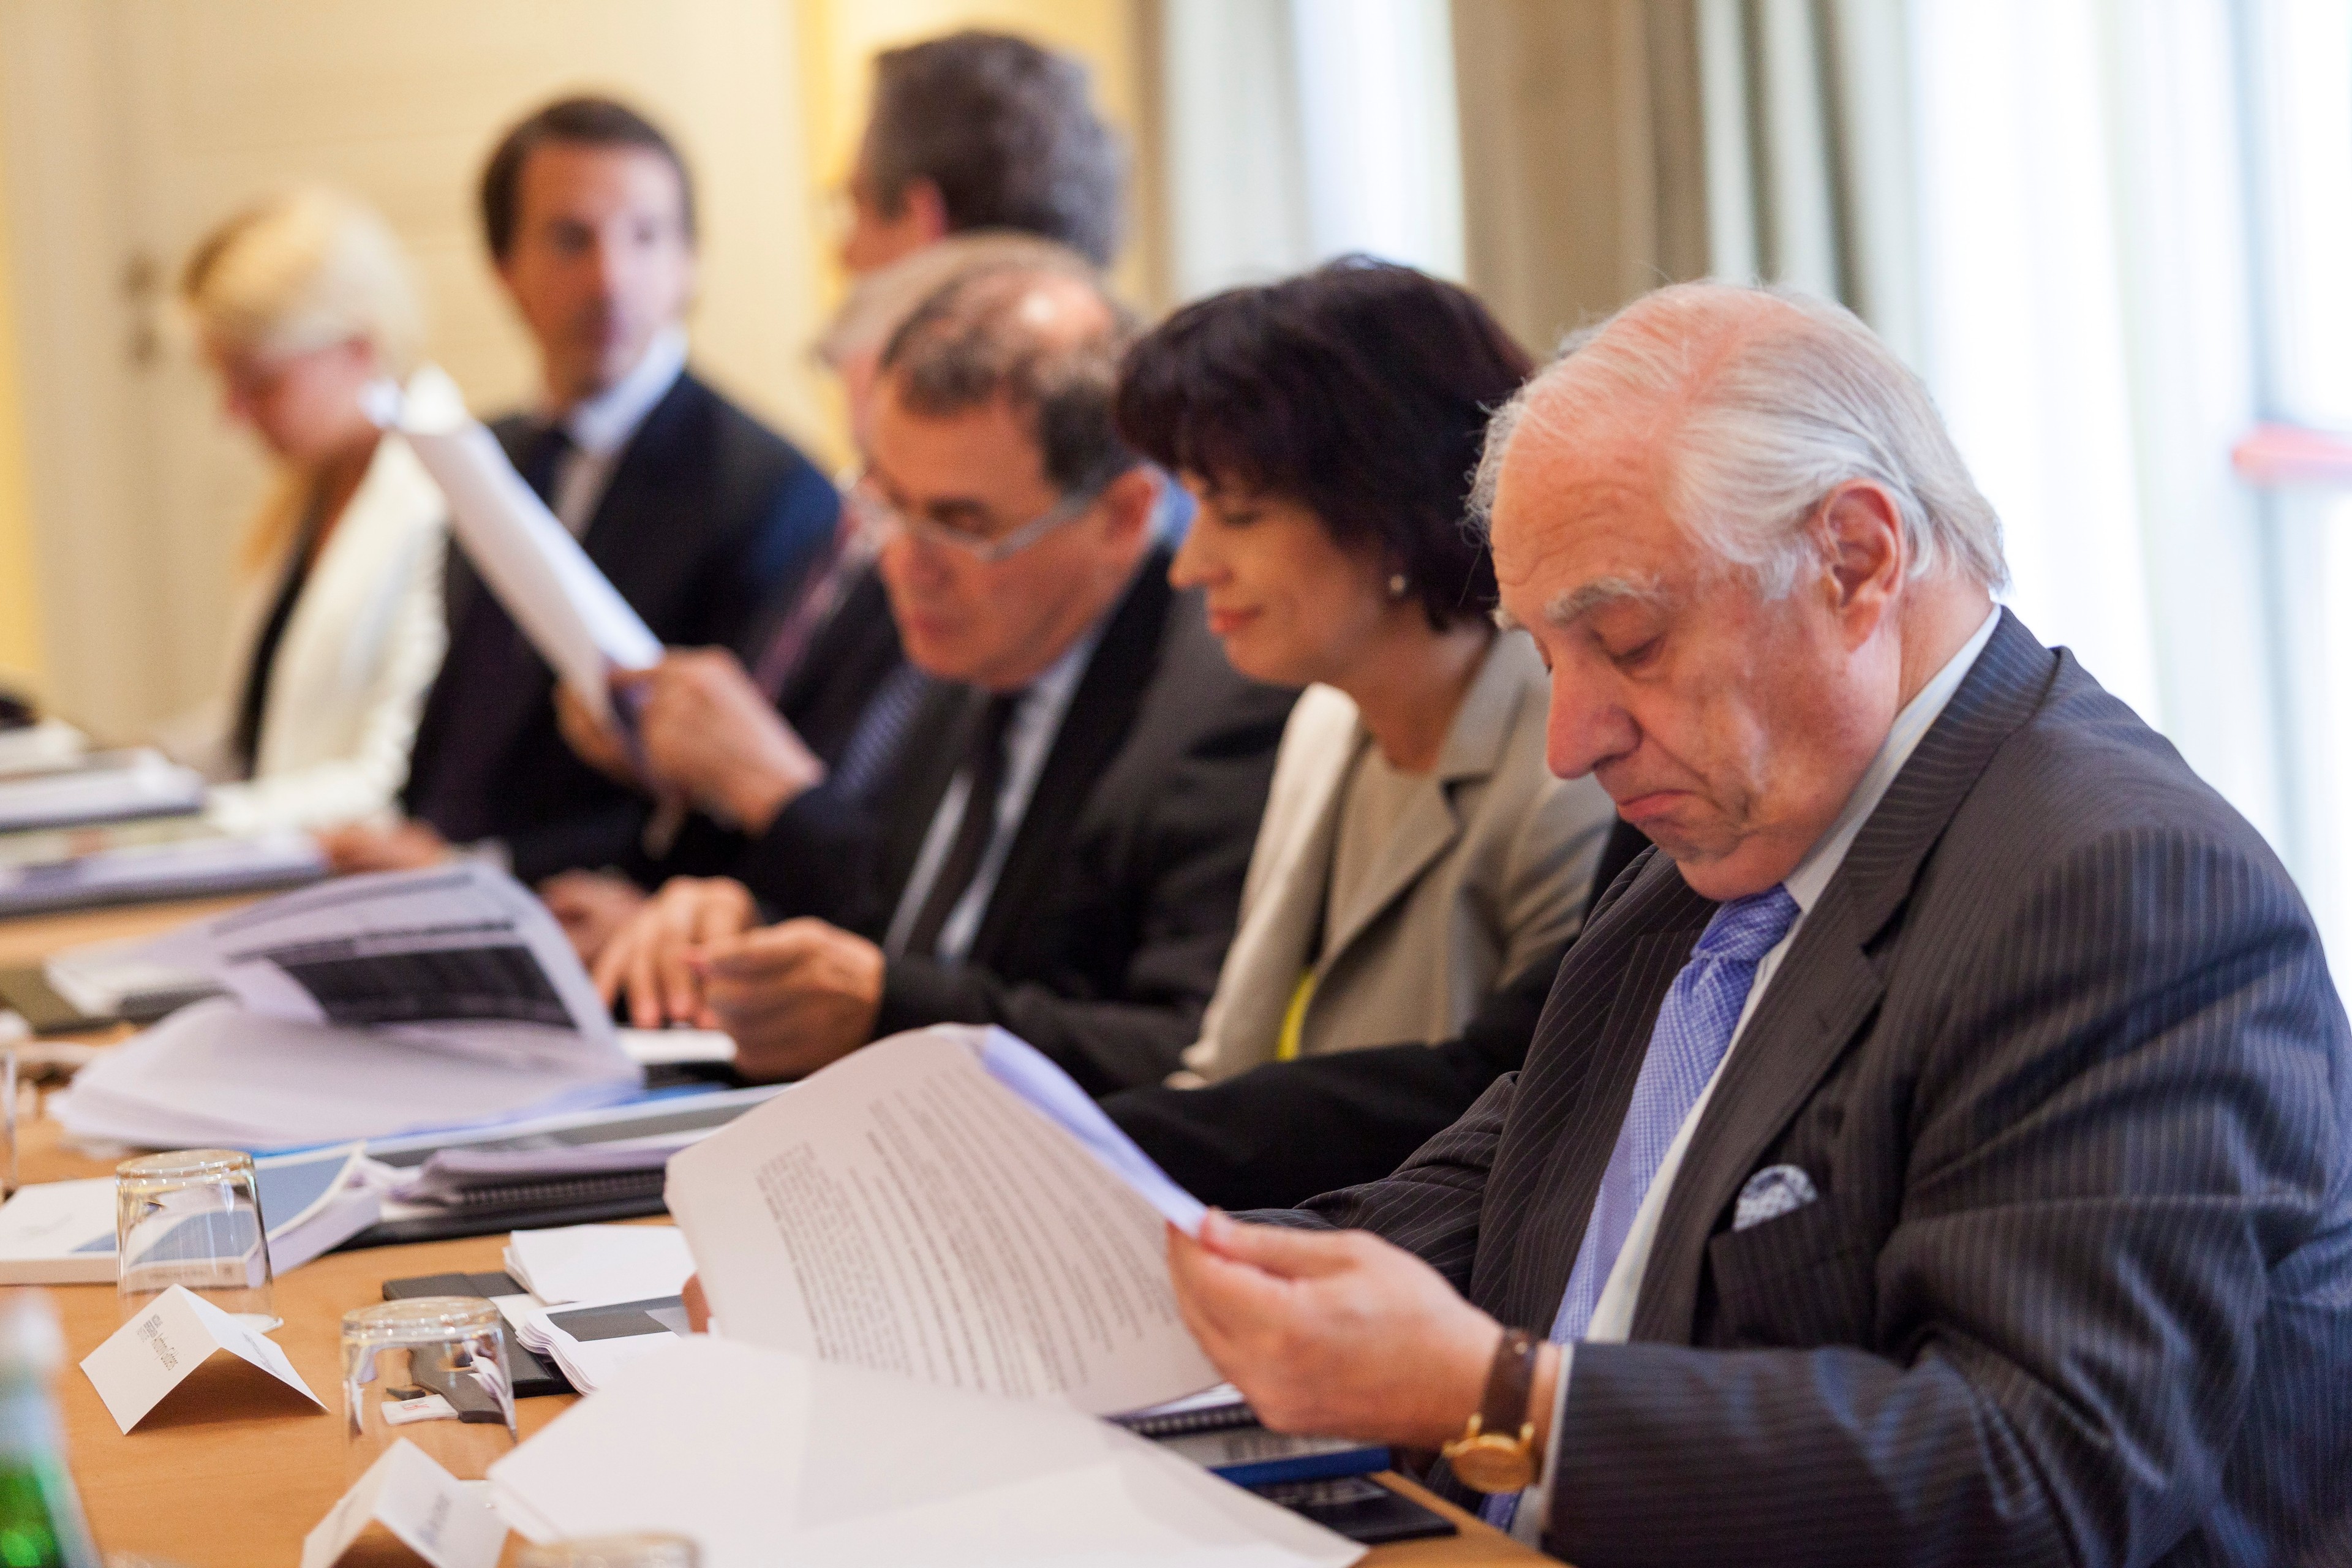 Nouriel Roubini, Doris Leuthard, and Peter Sutherland at CFE meeting in Rome